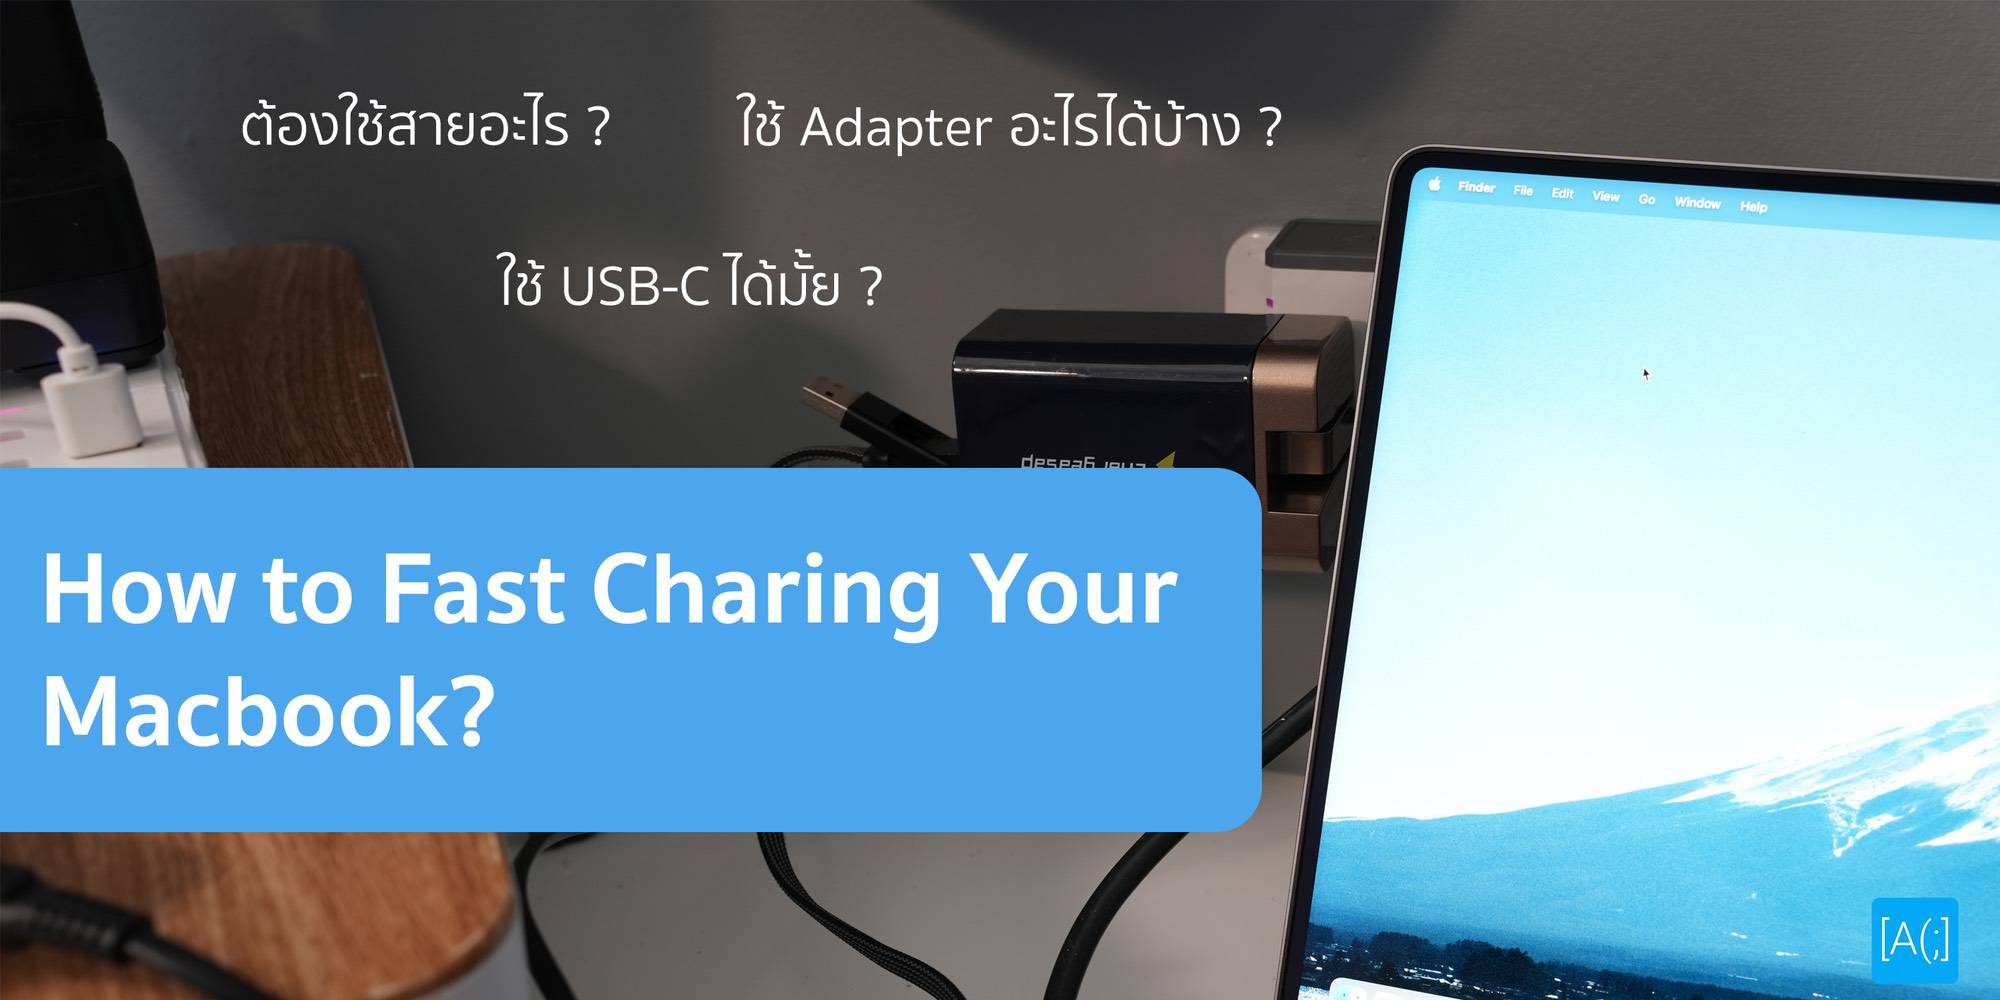 How to Fast Charing Your Macbook?